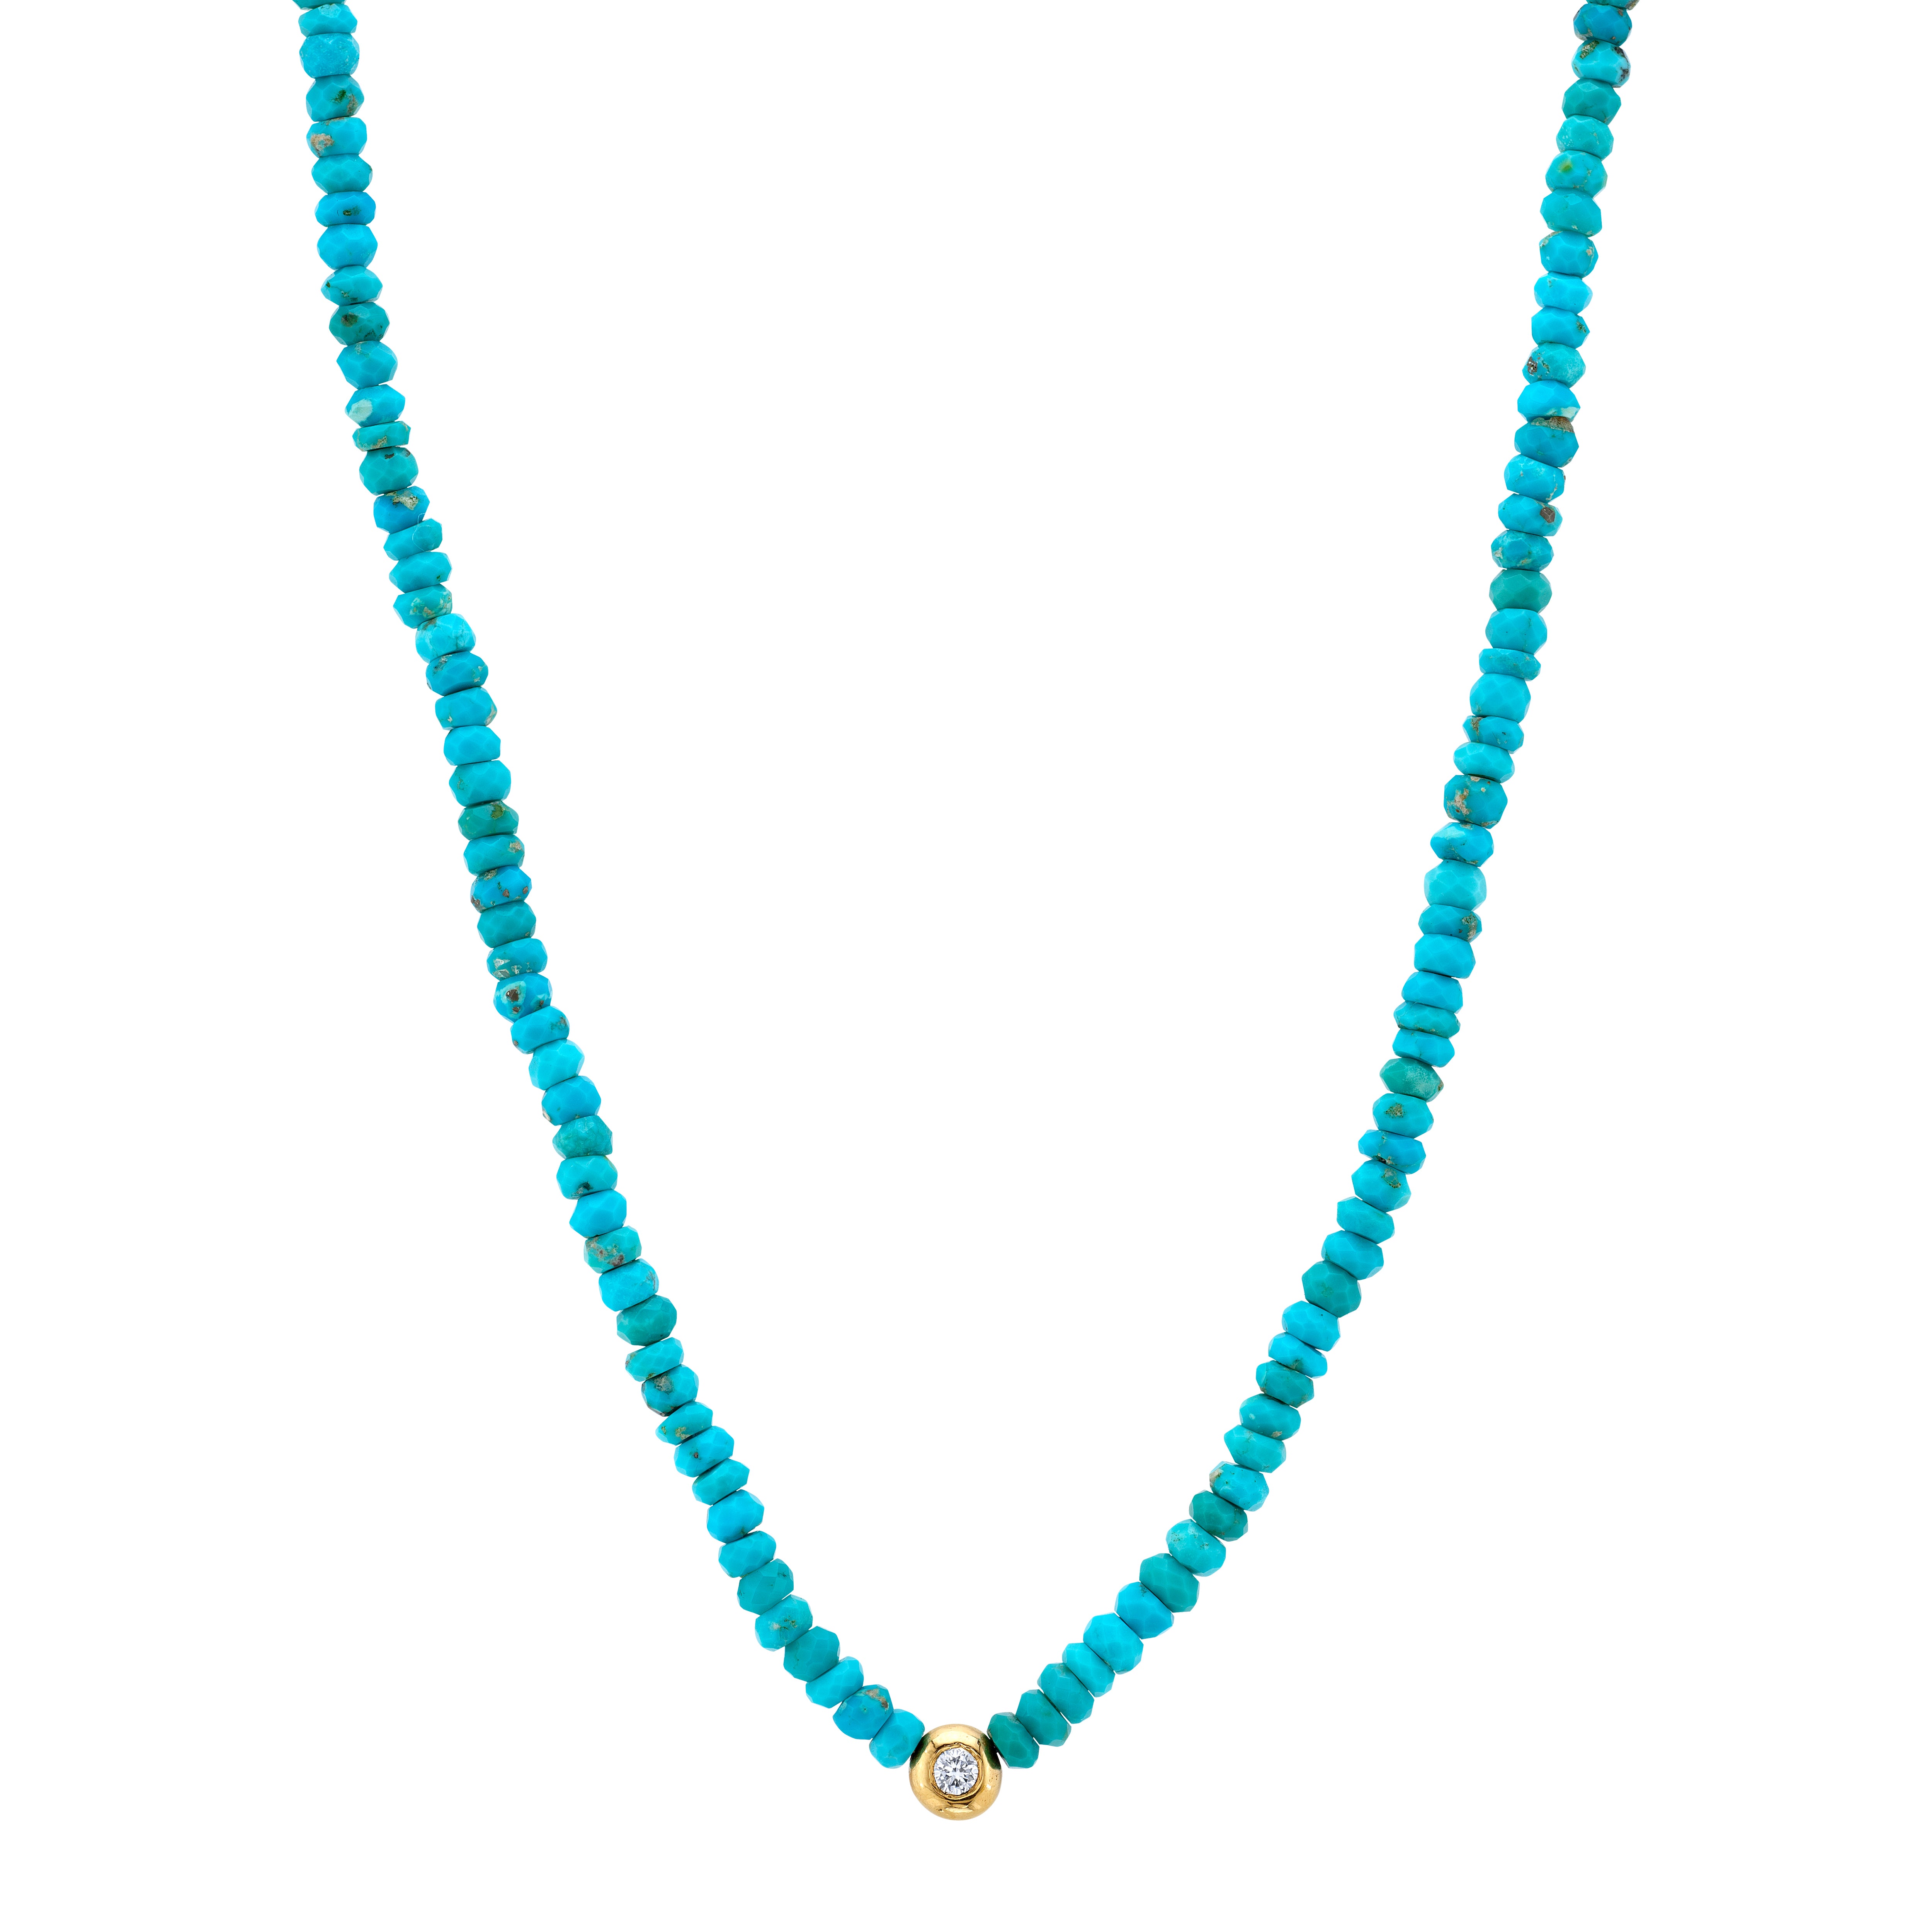 Diamond and Faceted Turquoise Beaded Necklace Beaded Jill Hoffmeister   